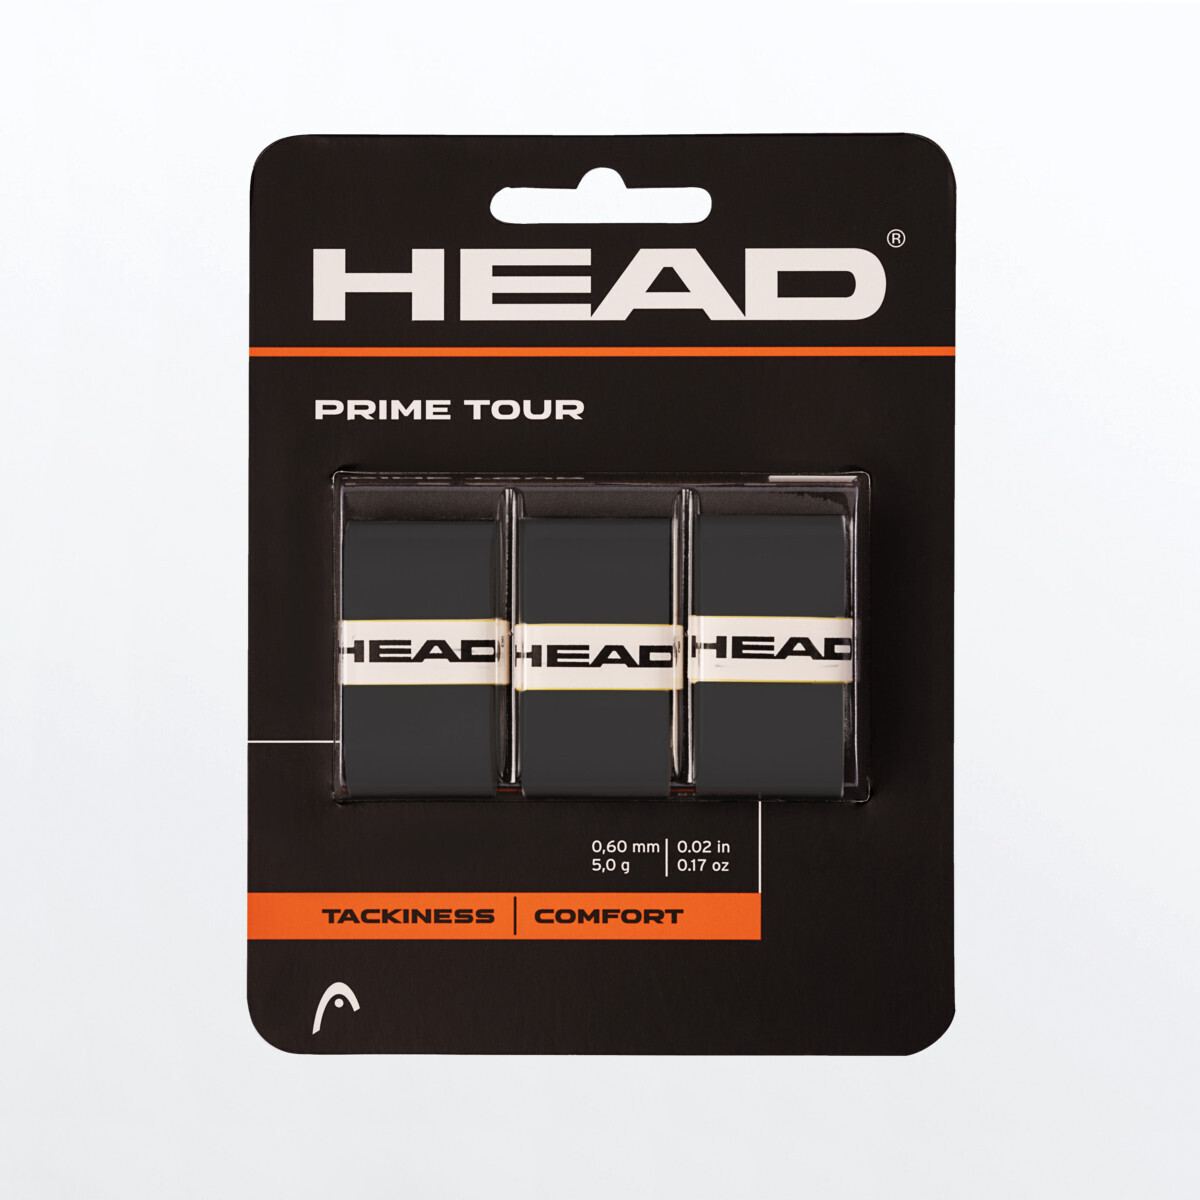 Head Prime Tour Overgrips 3 Pack - Black